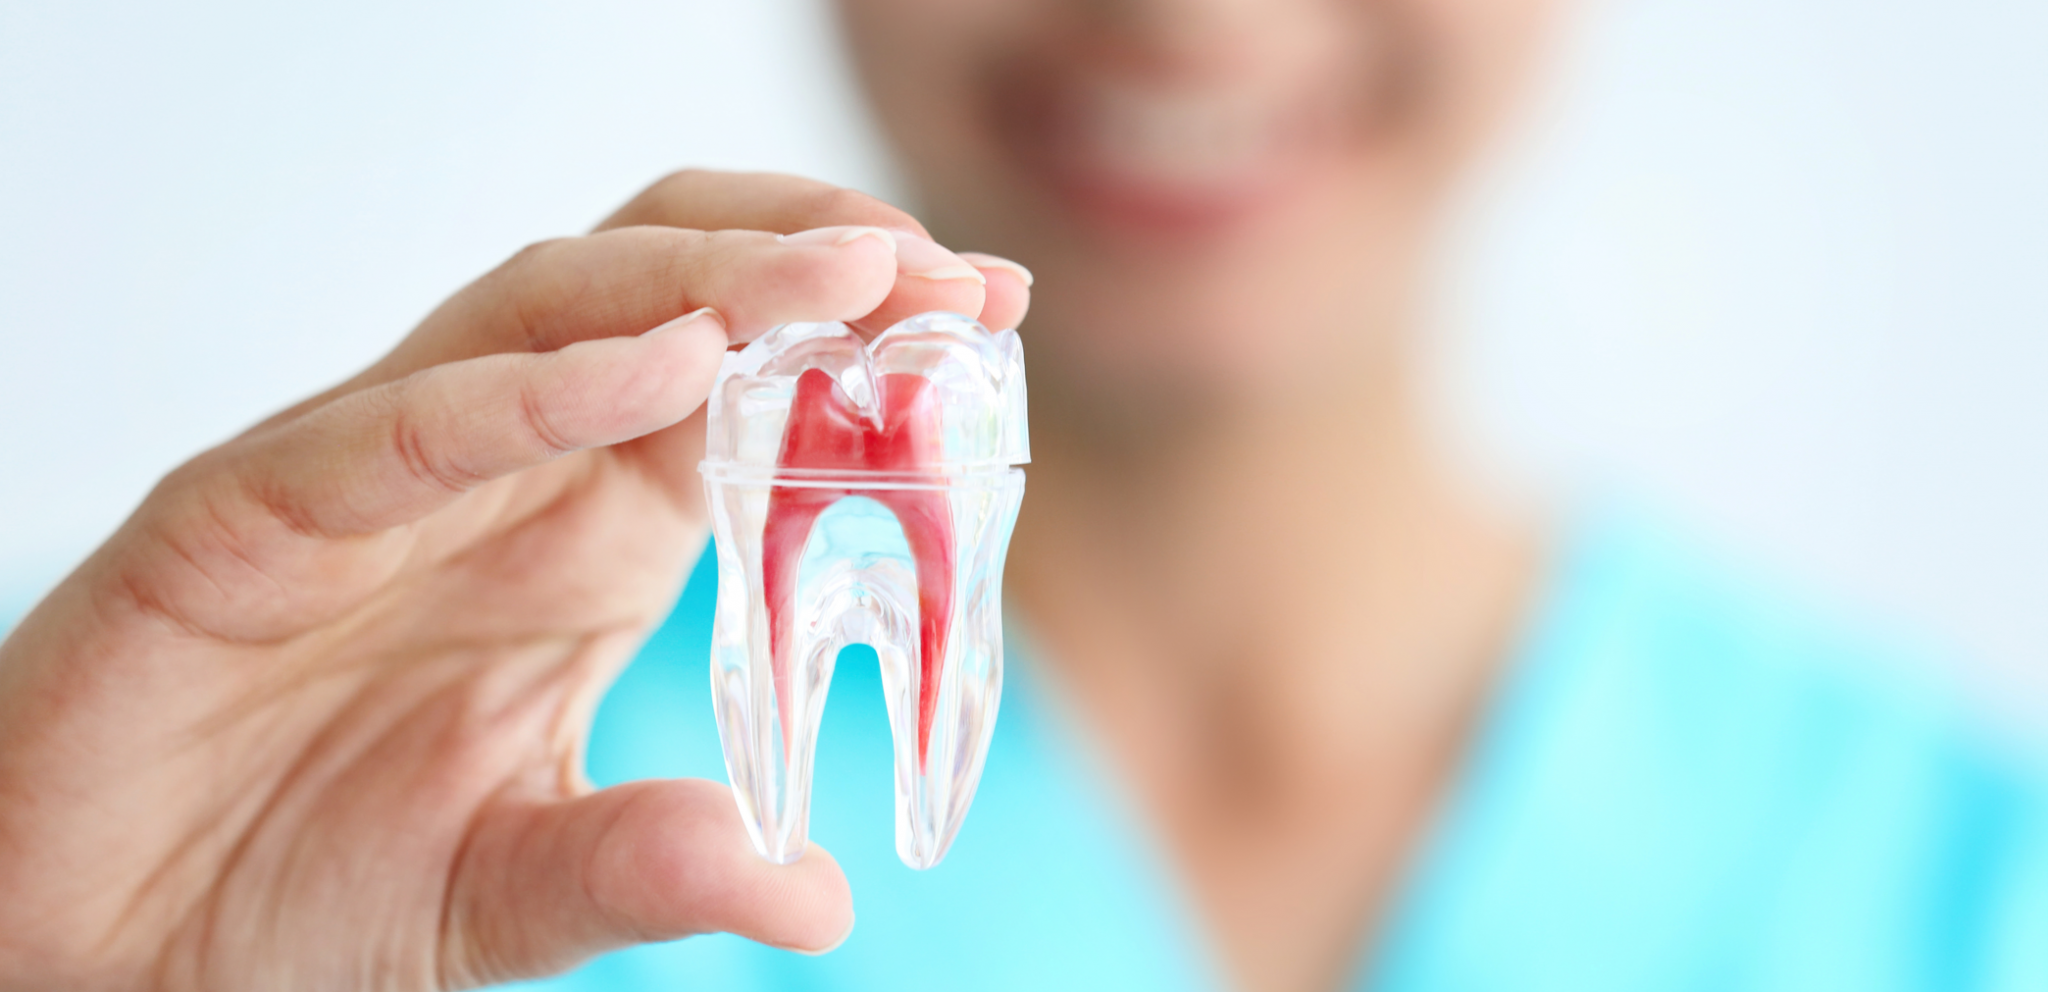 Why Should Patients Visit A Proficient Dentist To Undergo A Root Canal Treatment